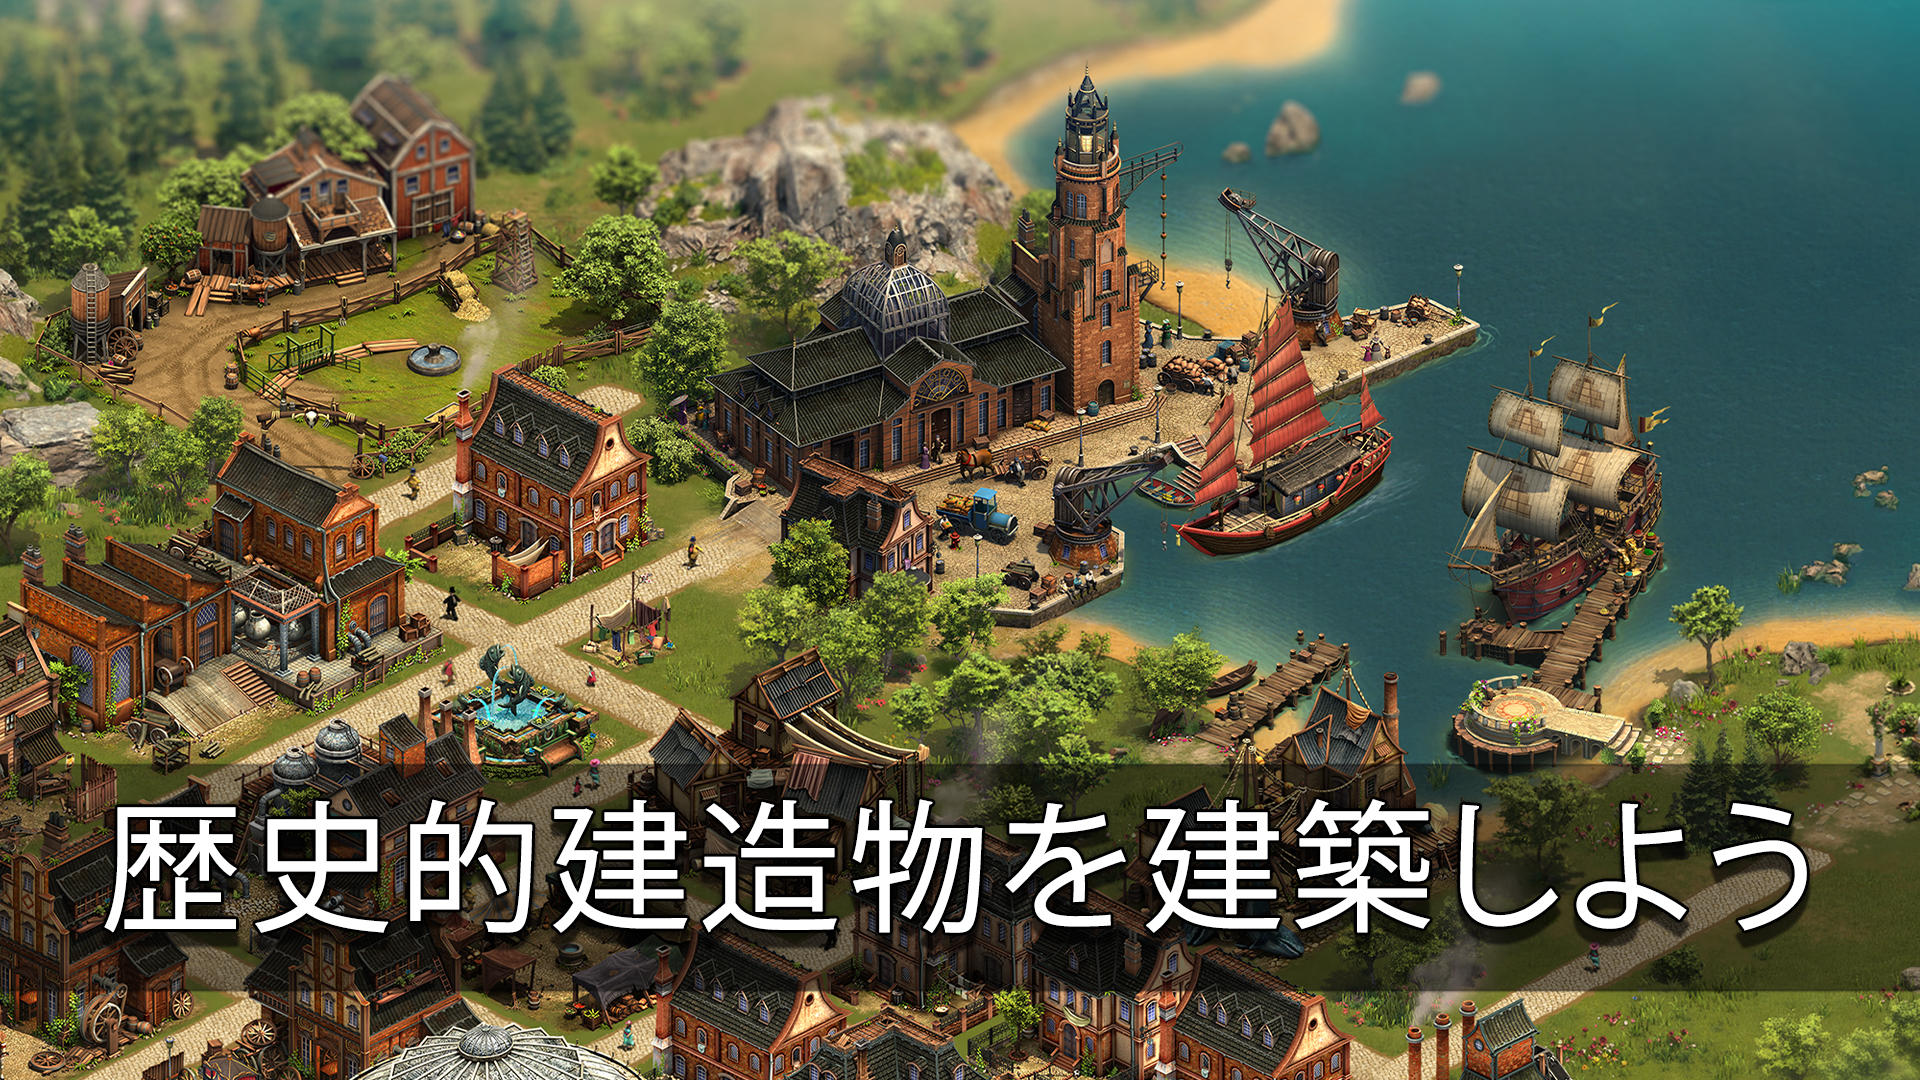 Screenshot 1 of Forge of Empires:　町を築く 1.282.20